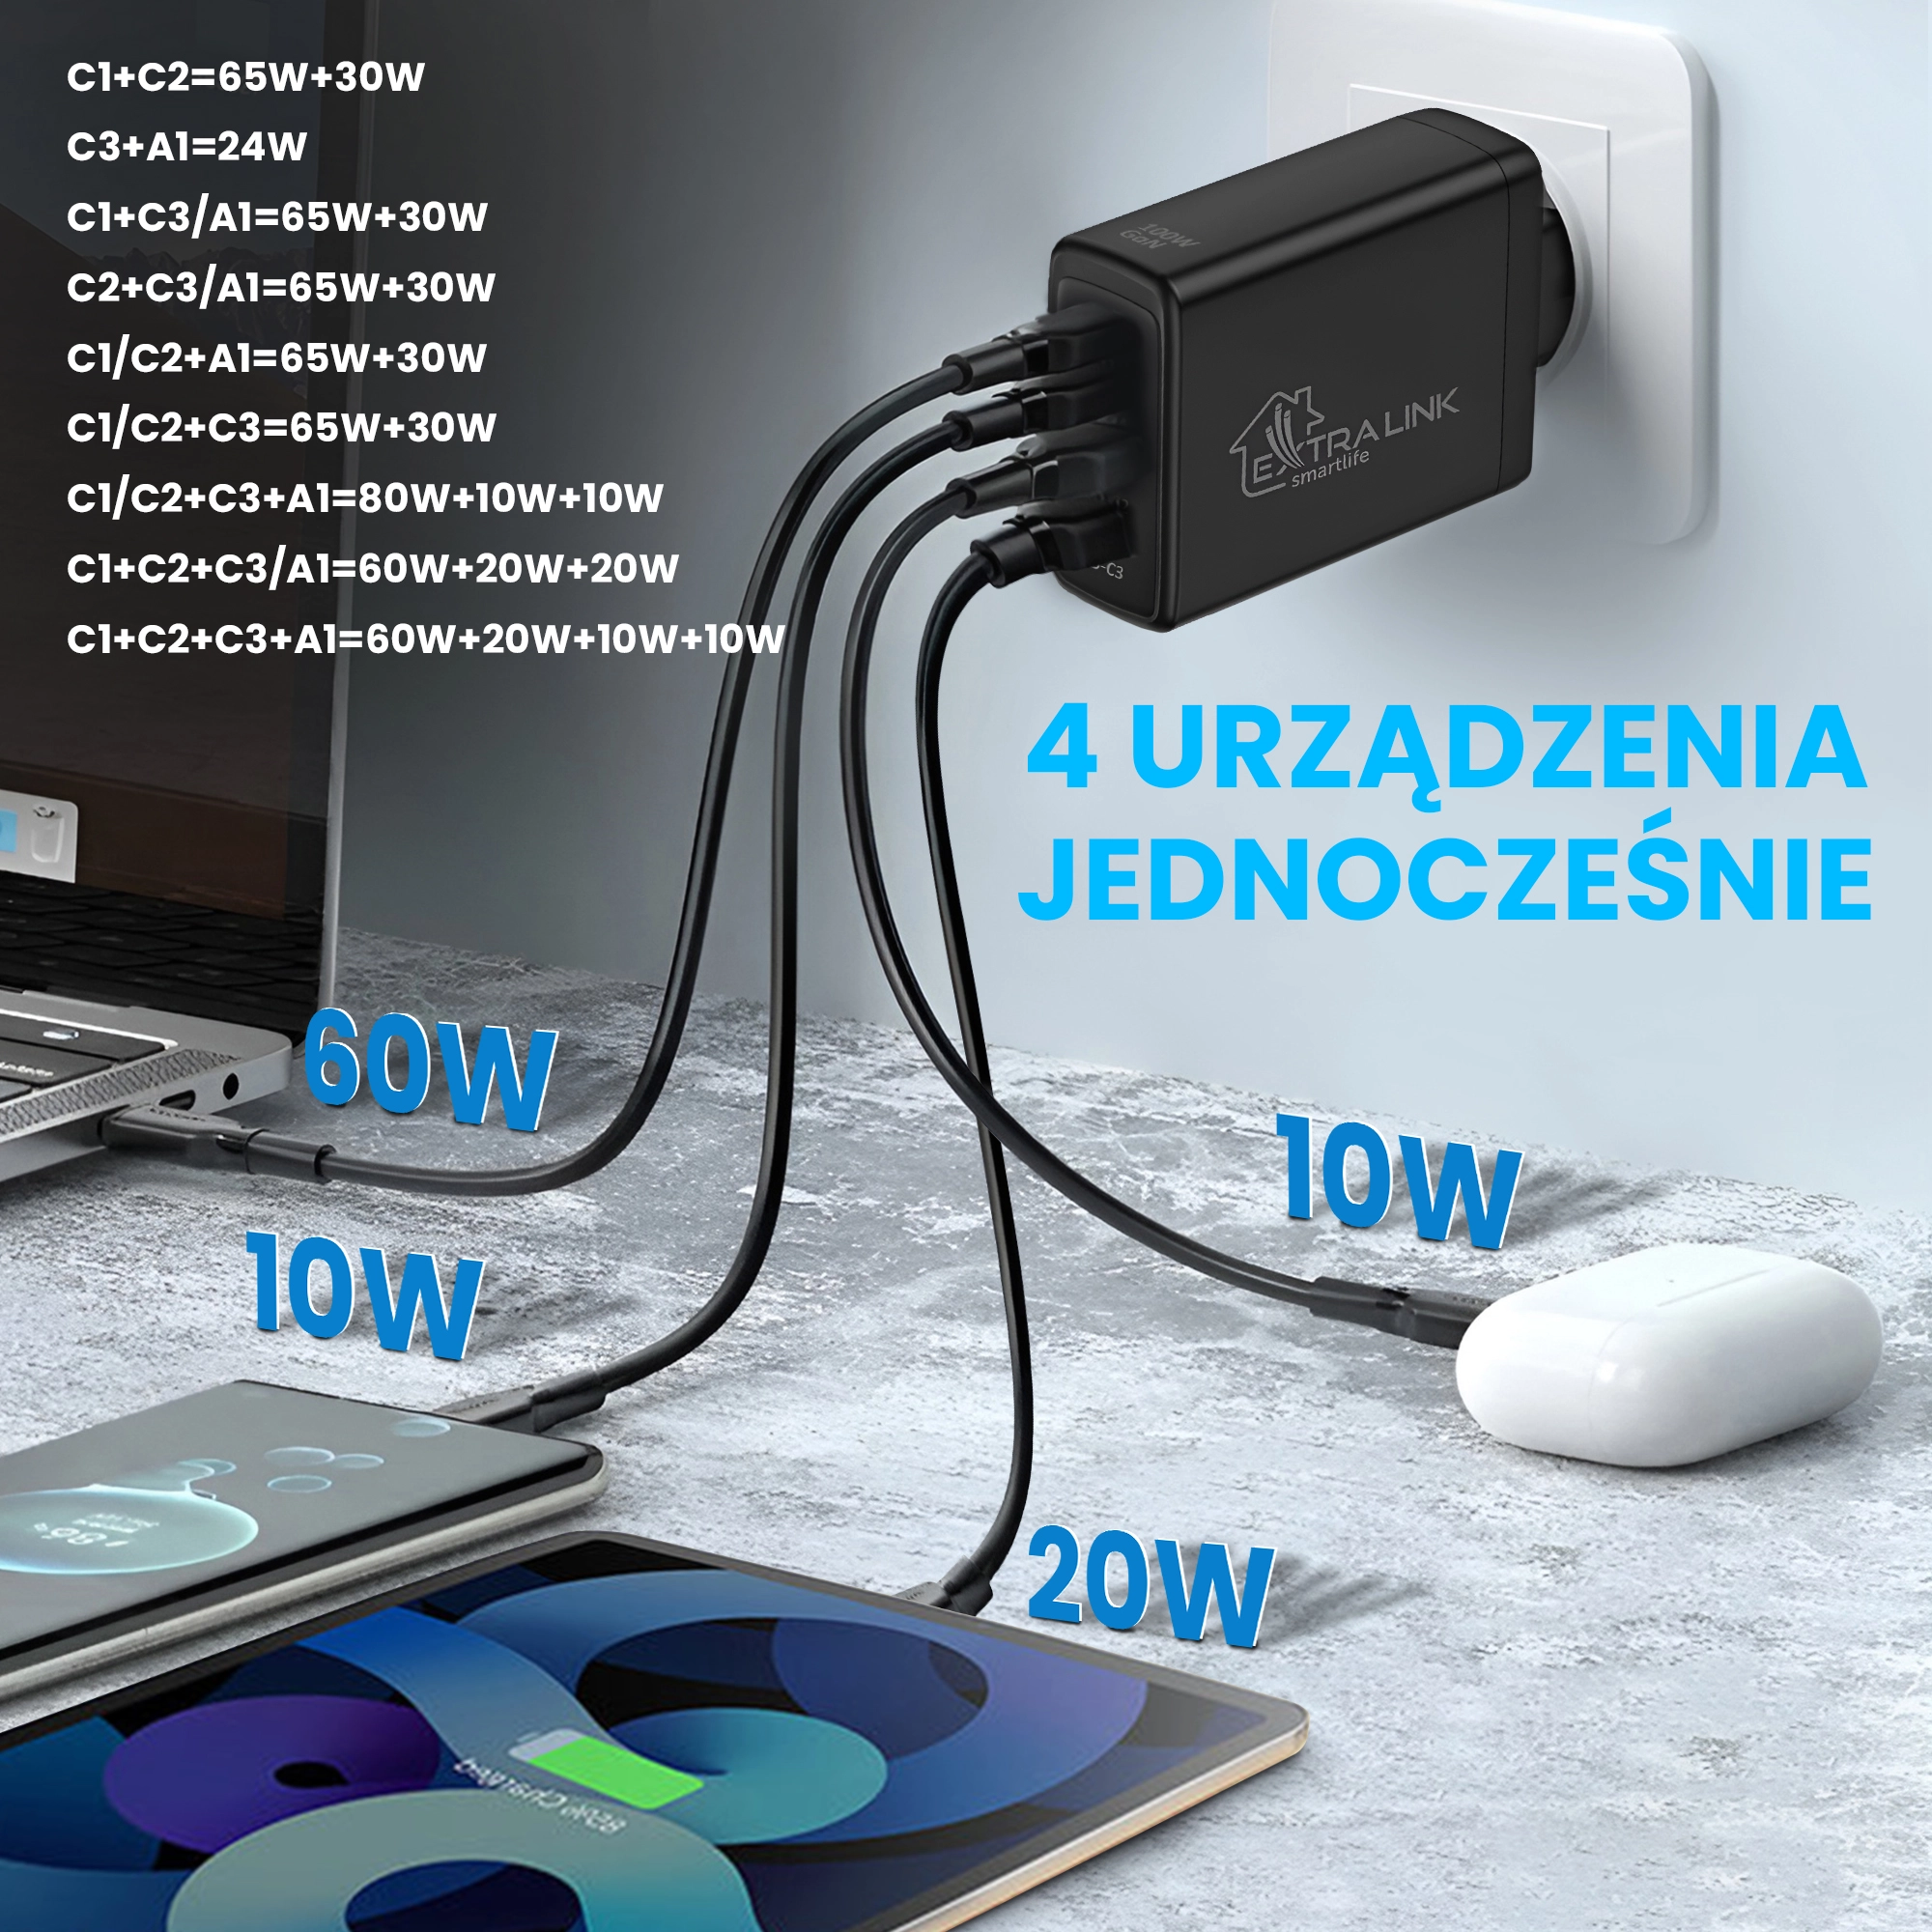 Extralink-Smart-Life-Fast-Charger-100W-GaN